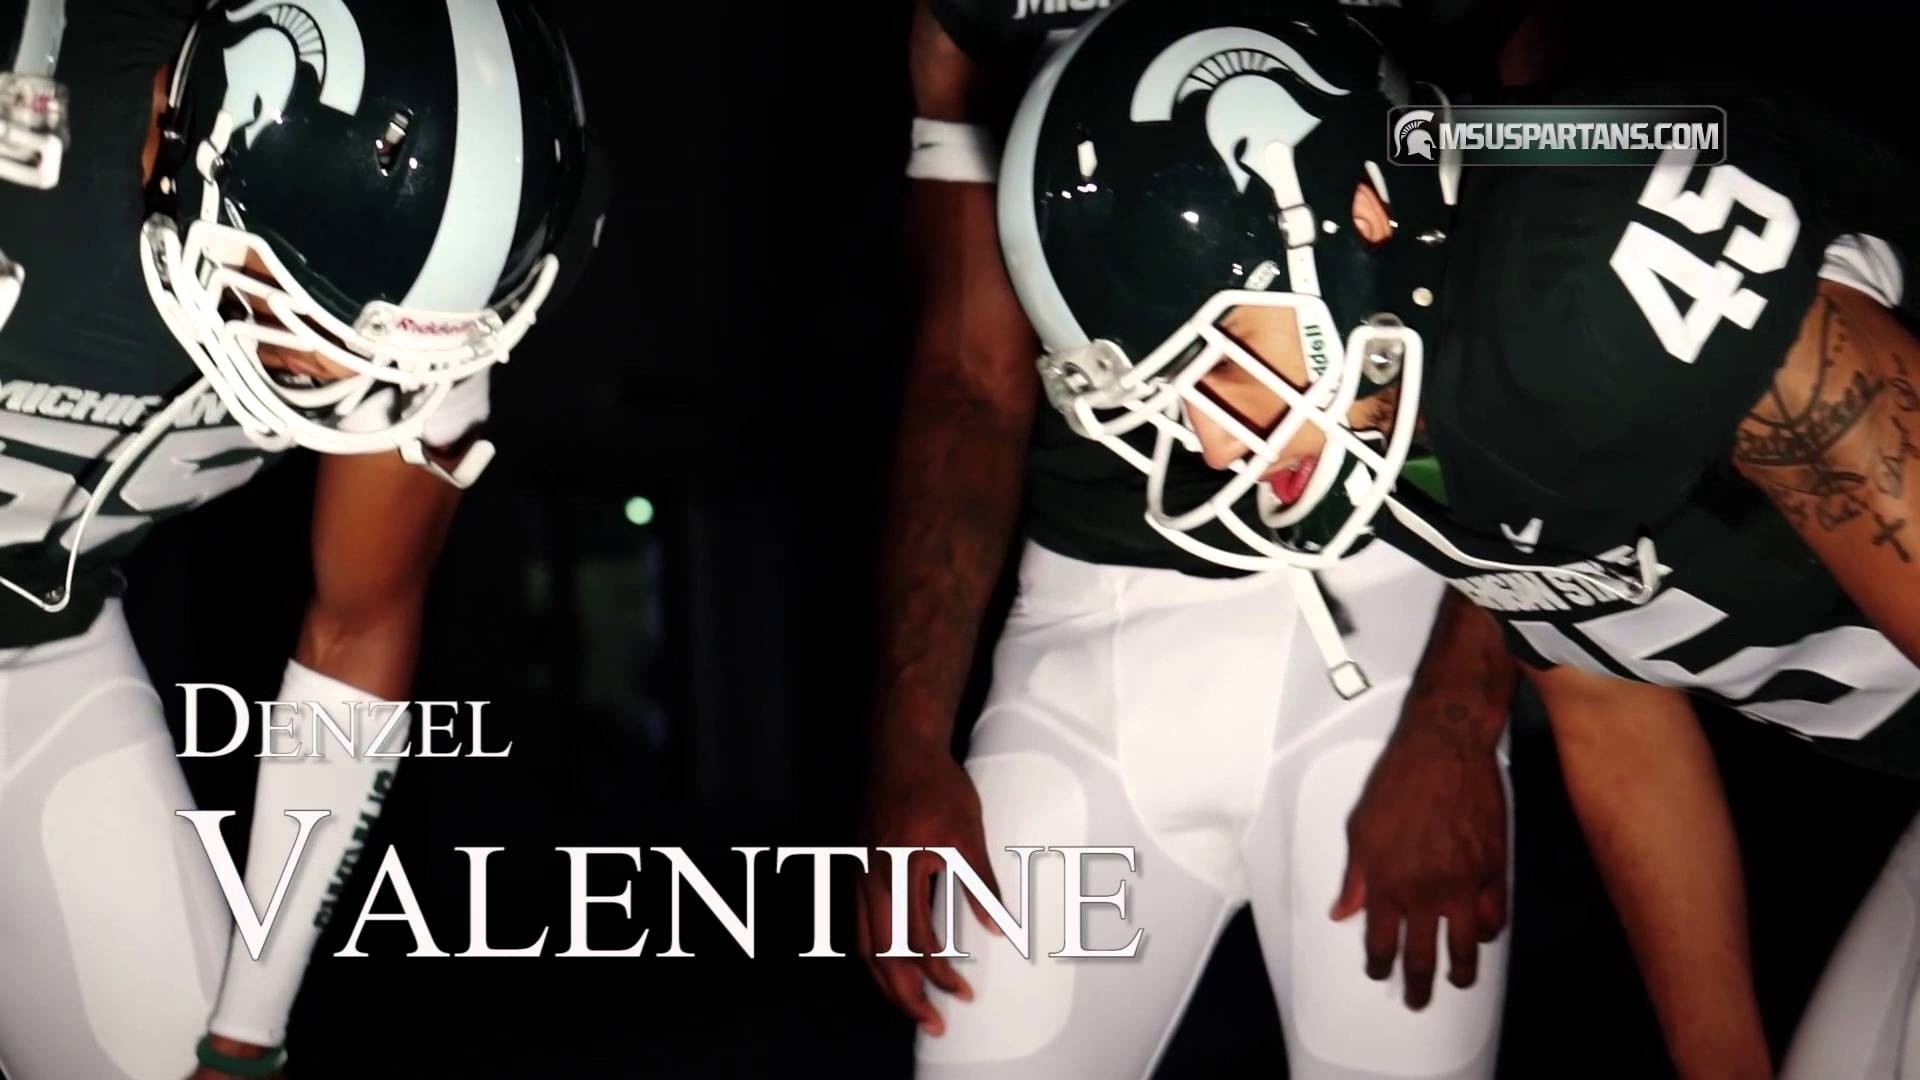 1920x1080 Title : michigan state spartans stand together – youtube. Dimension : 1920  x 1080. File Type : JPG/JPEG